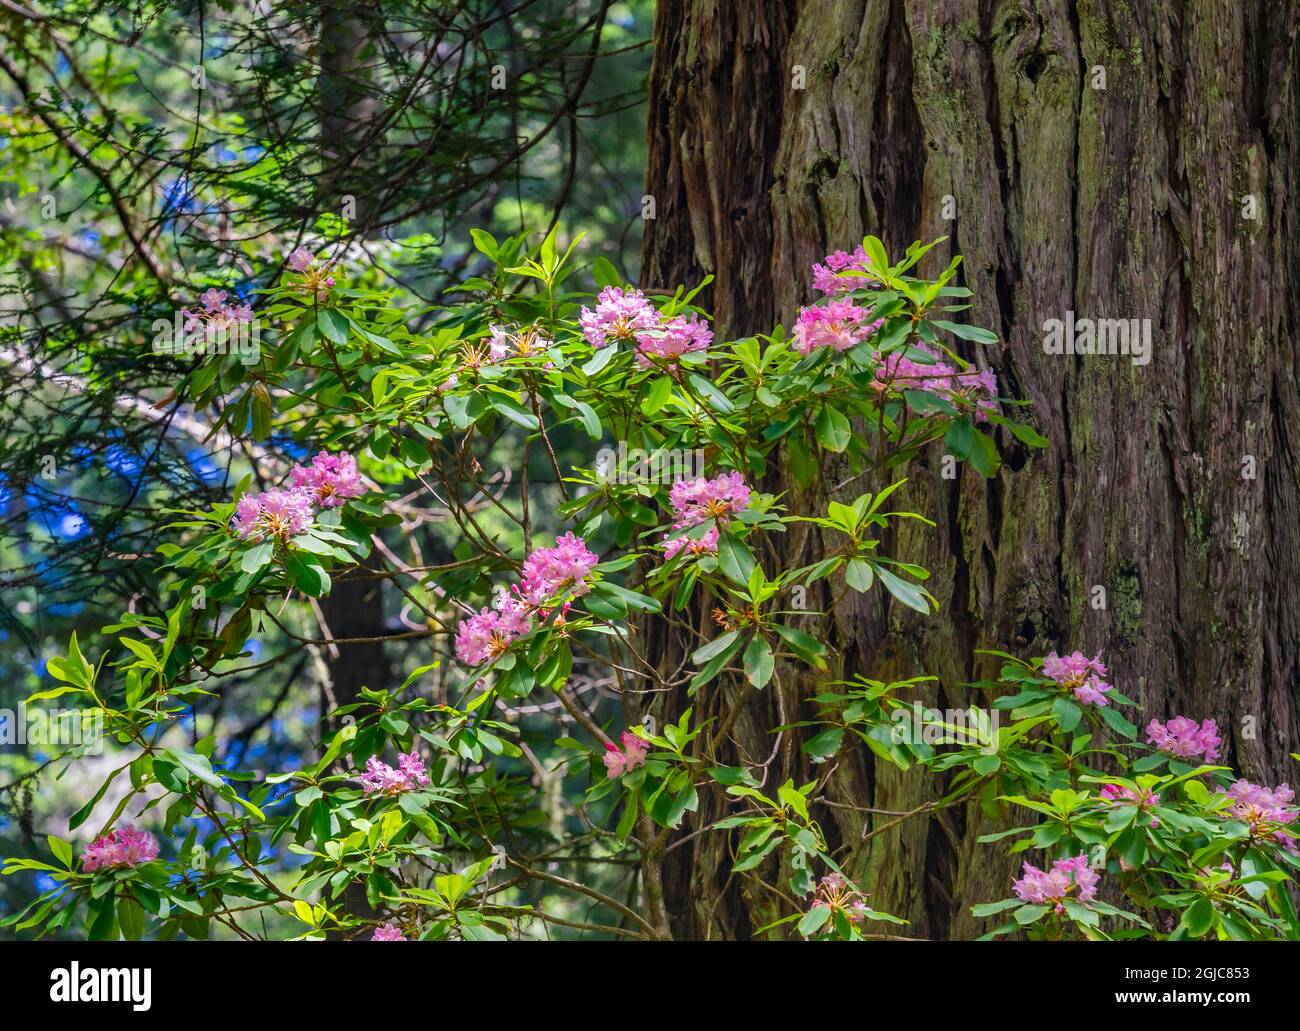 Green Large trees pink rhododendron, Lady Bird Johnson Grove, Redwoods National Park, California. Tallest trees in the world, thousands of year old. Stock Photo